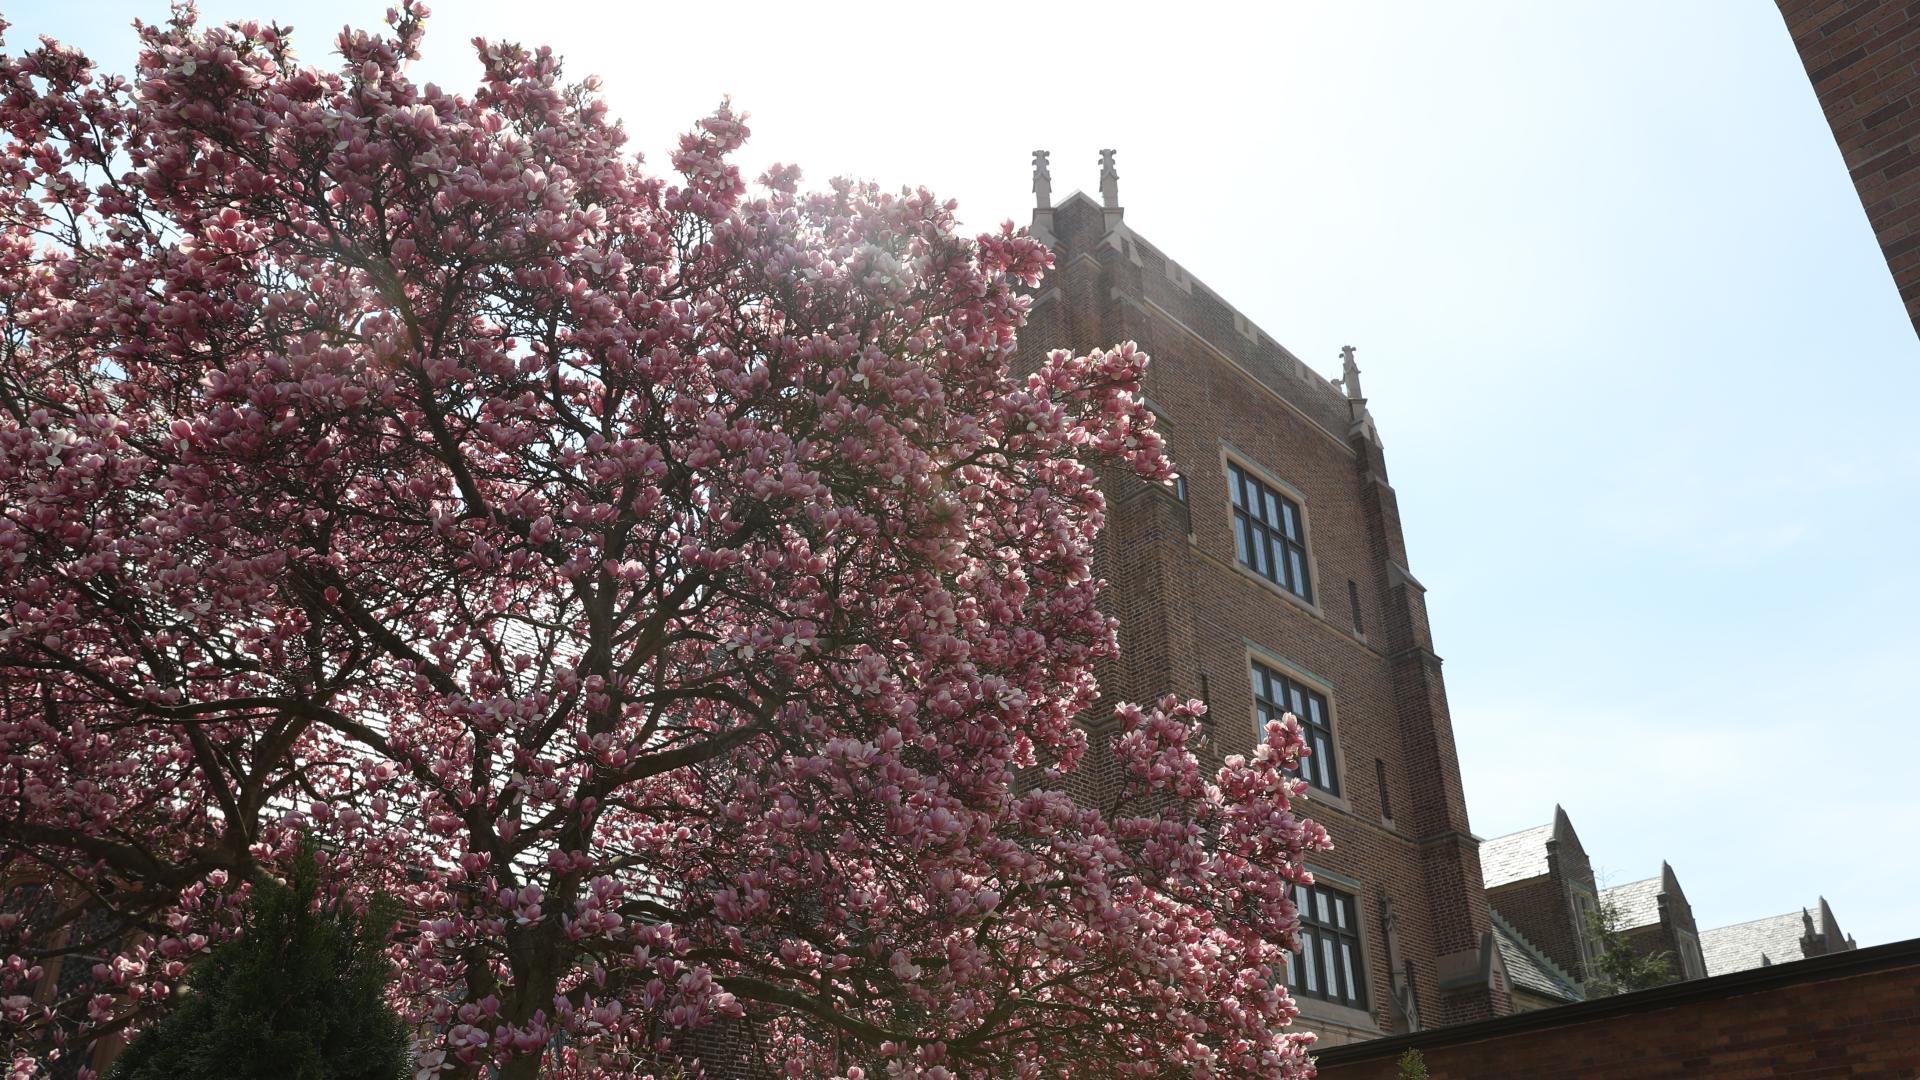 Magnolia Tree and tower